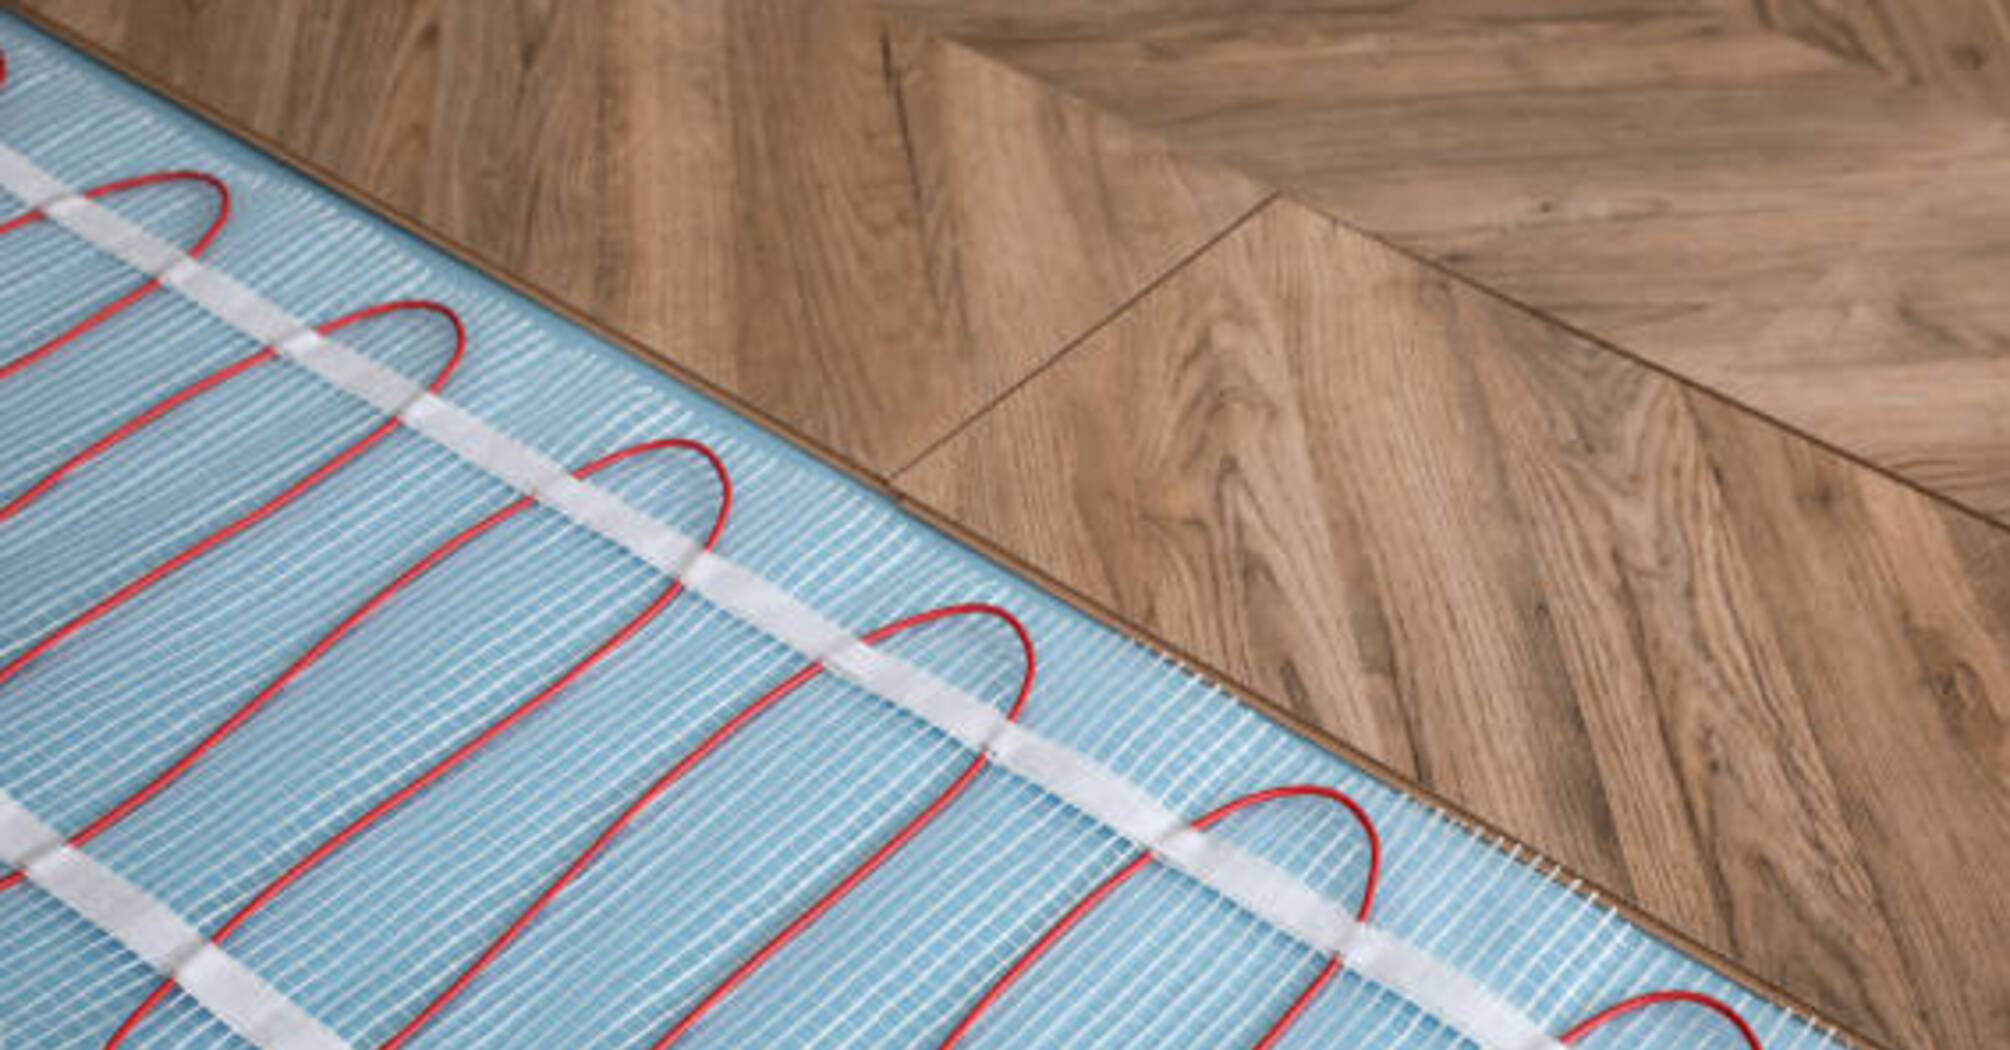 Is installing electric floor heating worth it: advantages and disadvantages